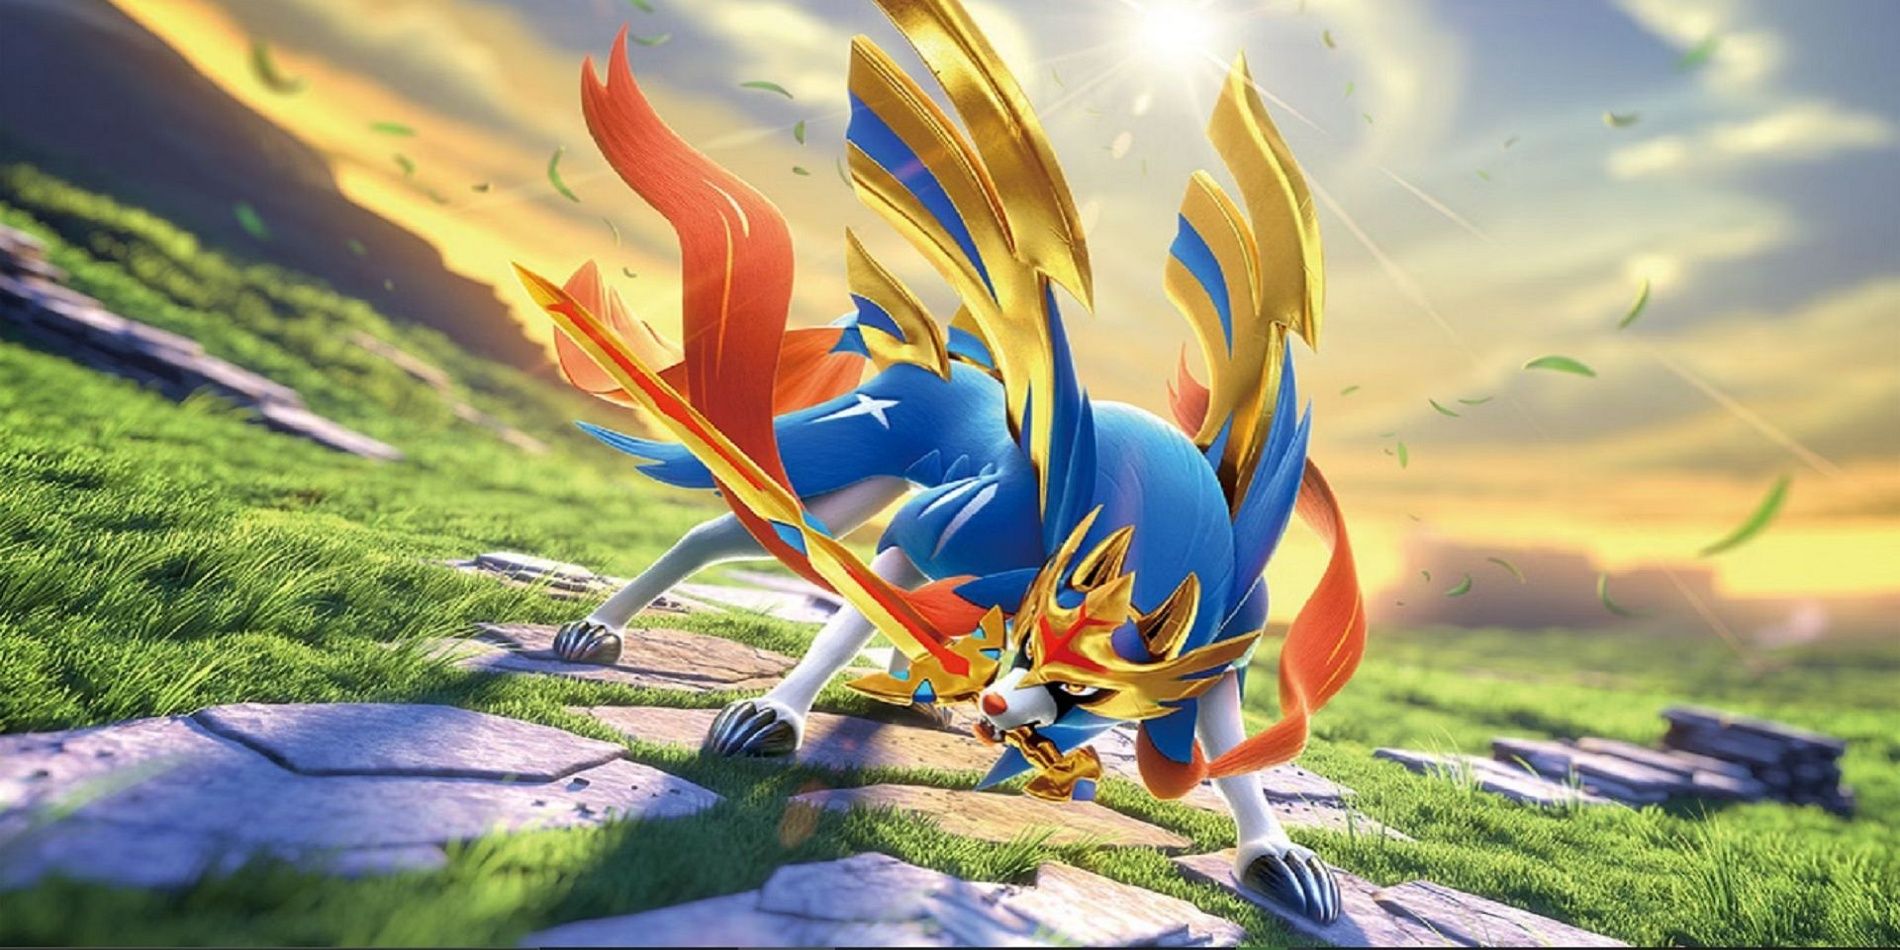 Pokémon UNITE on X: Zacian is a melee All-Rounder that depends on its  offensive power to lock down enemies and give its teammates an opportunity  to score. How do you build your